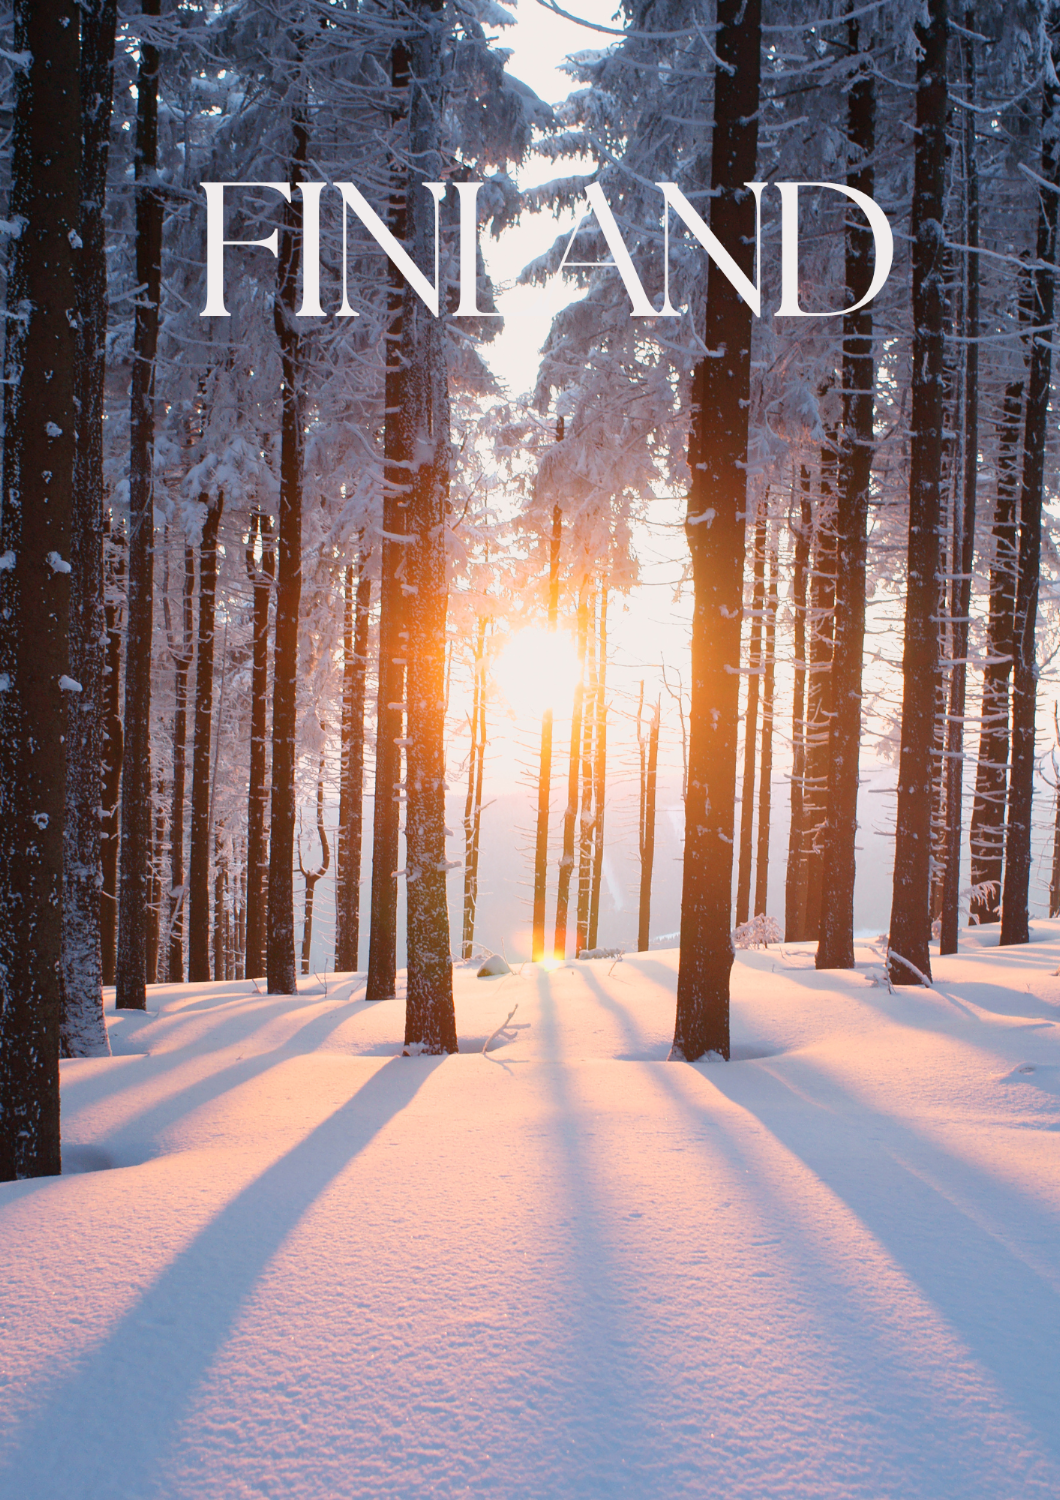 Today is Finland's Nature Day